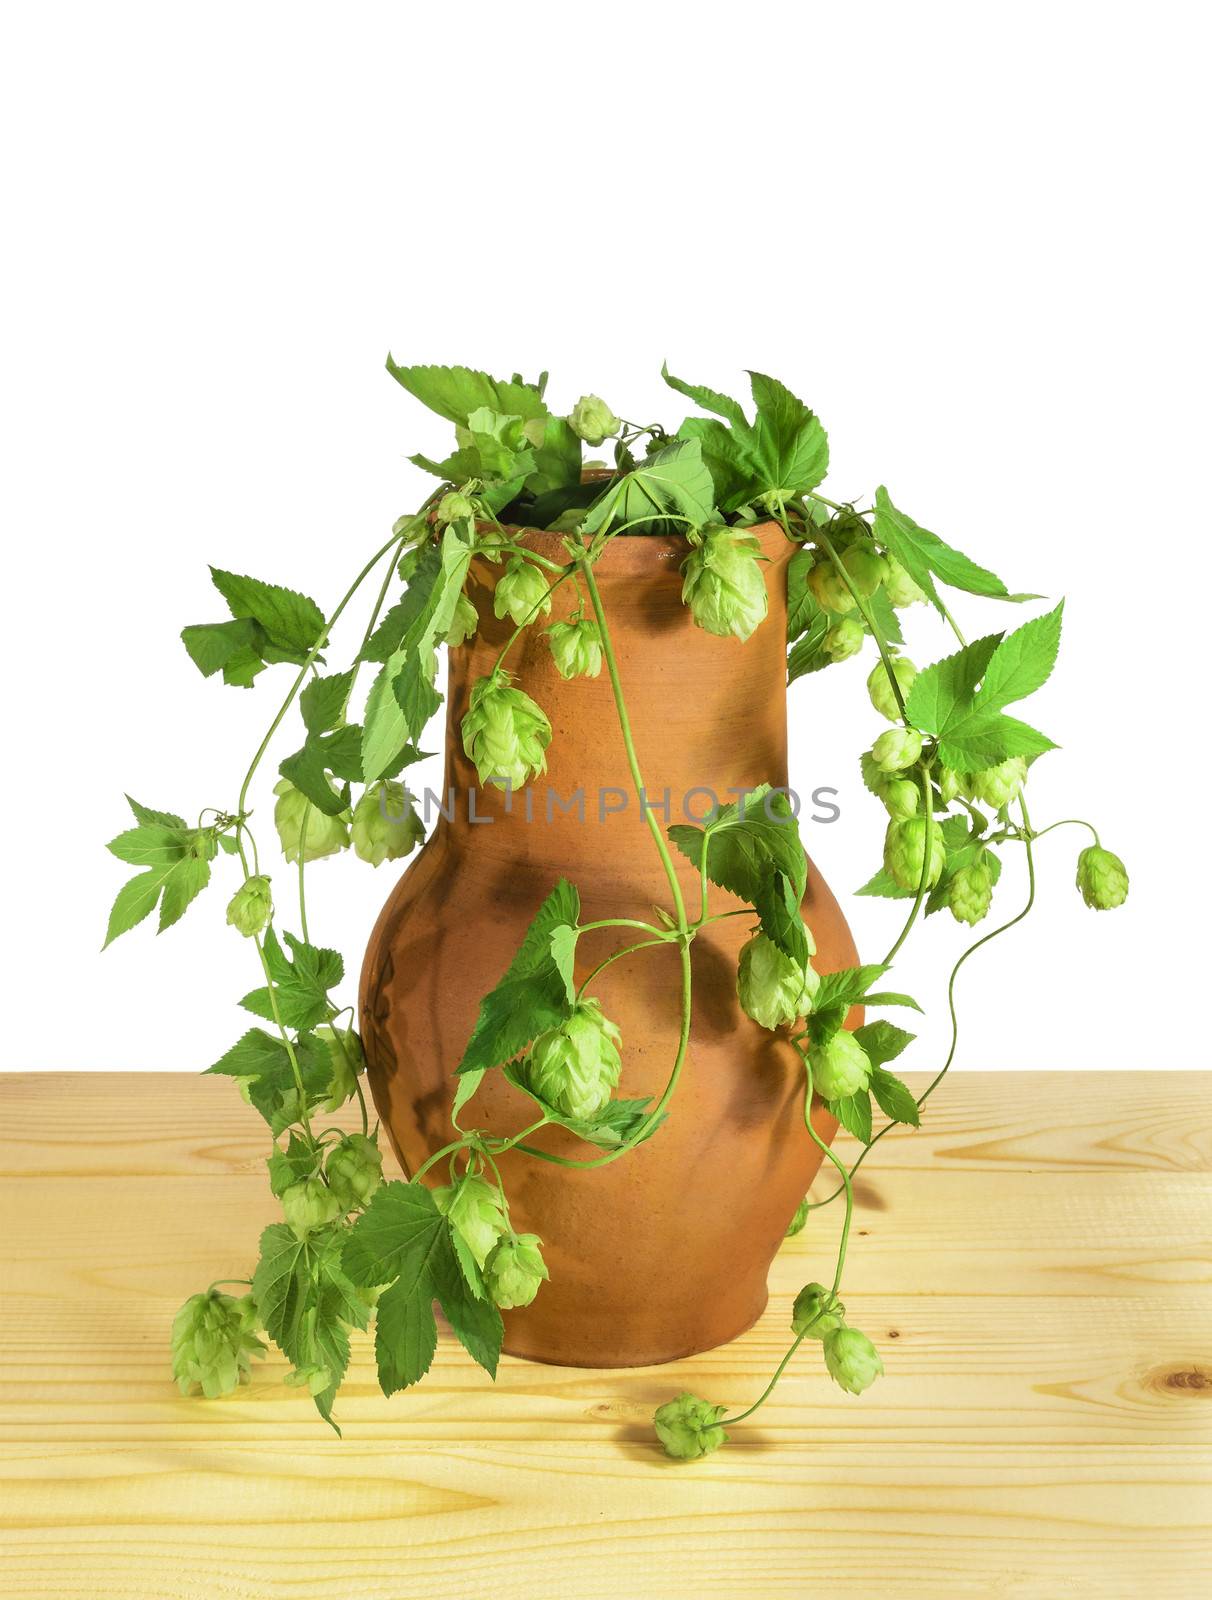 Flowers and leaves of hop (Humulus lupulus) in a clay pot on a wooden table. Isolated on a white background.